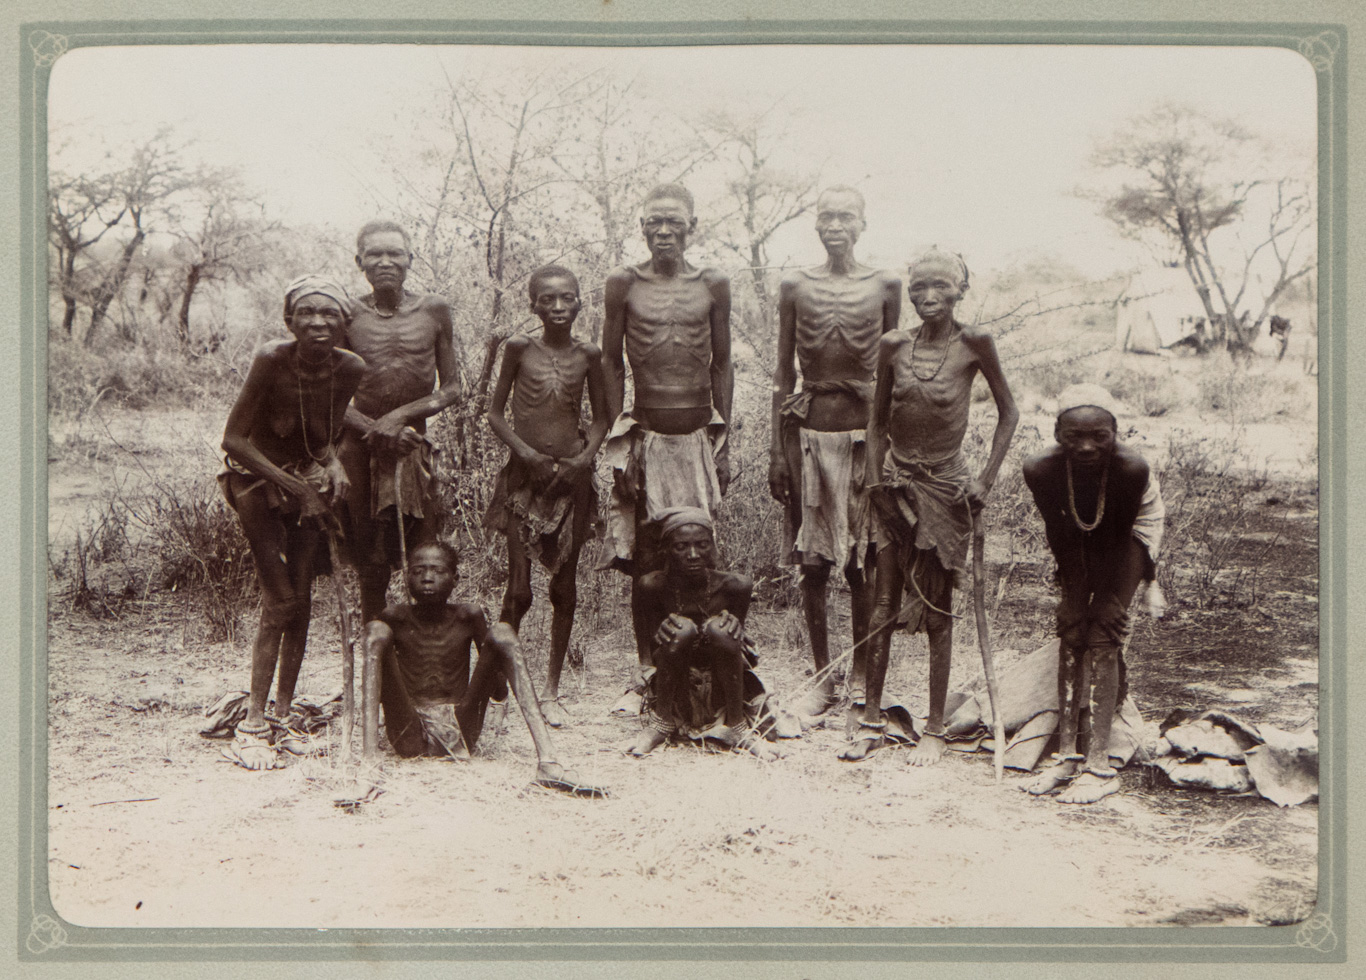 A photo titled “Captured Hereros,” taken circa 1904 by German colonists in Namibia. Photo | German Historical Museum